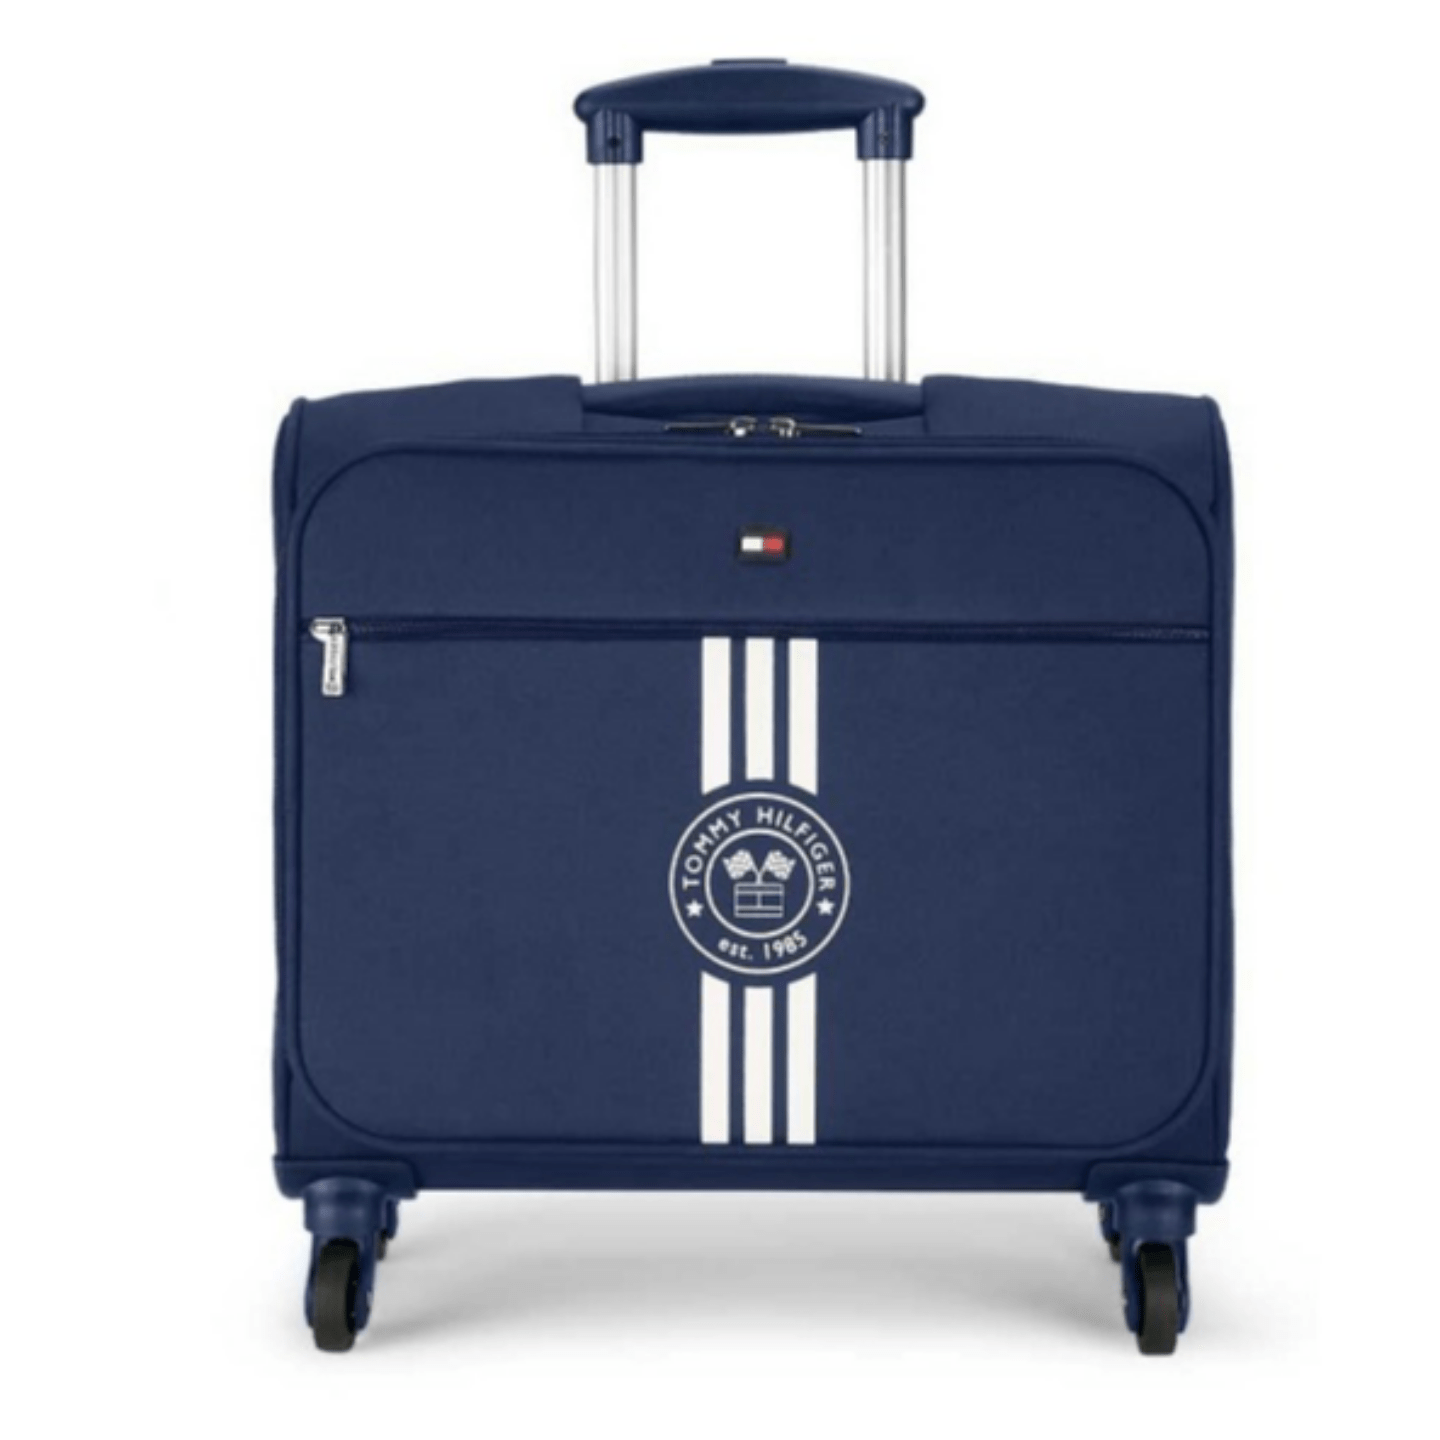 Tommy Hilfiger 45 cm Carry-On Luggage